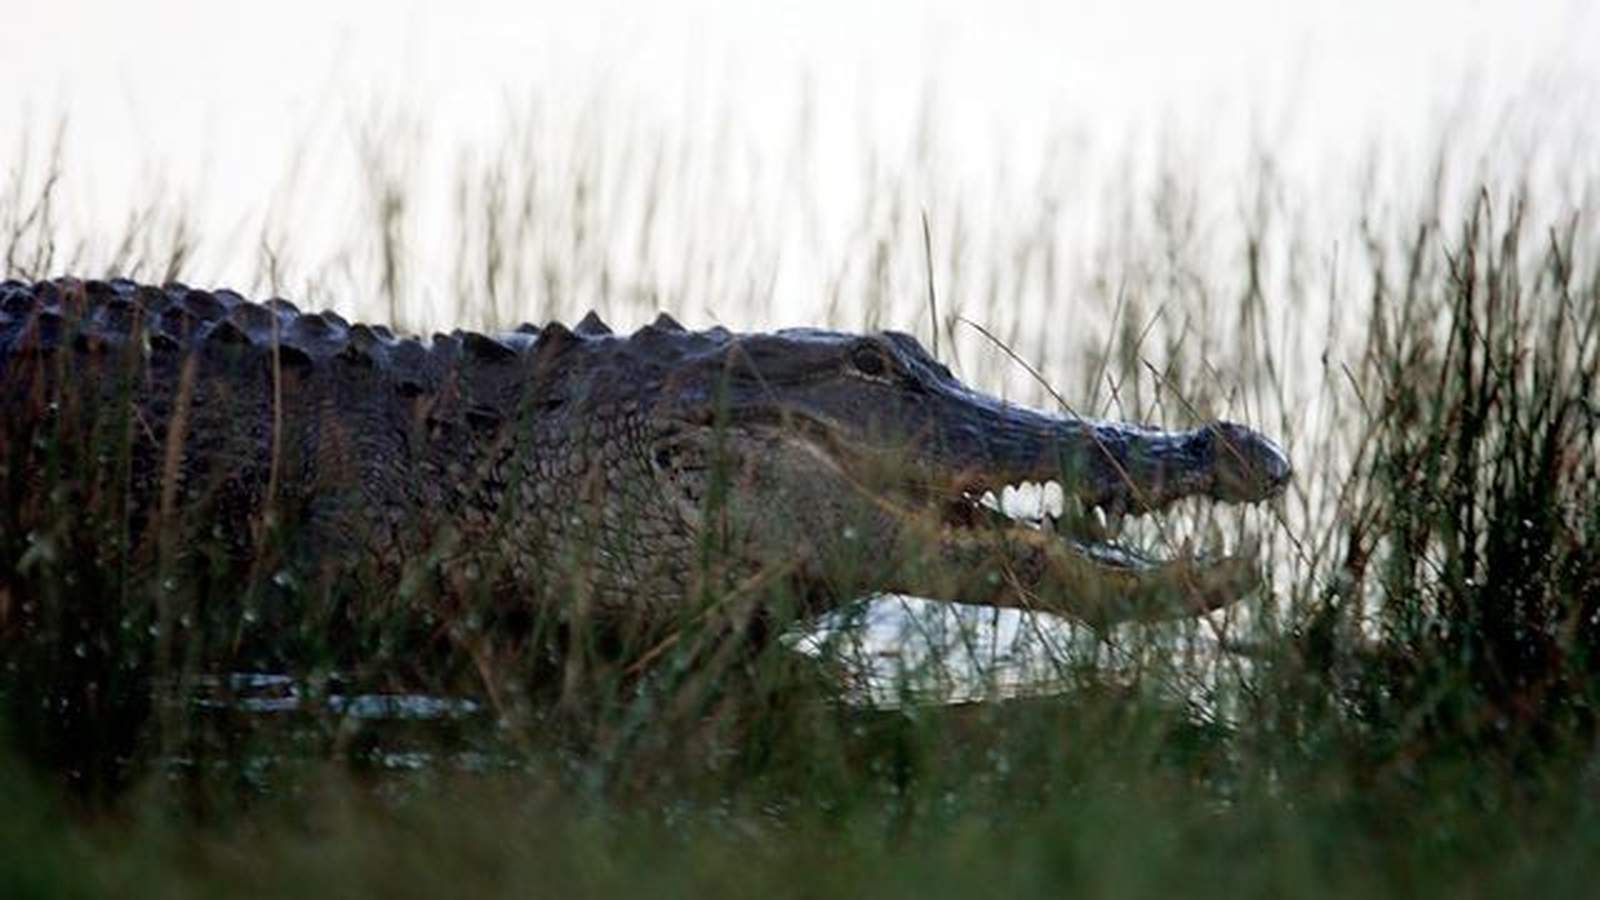 12-foot gator lunges 3 feet out of water, chomps Florida man’s arm